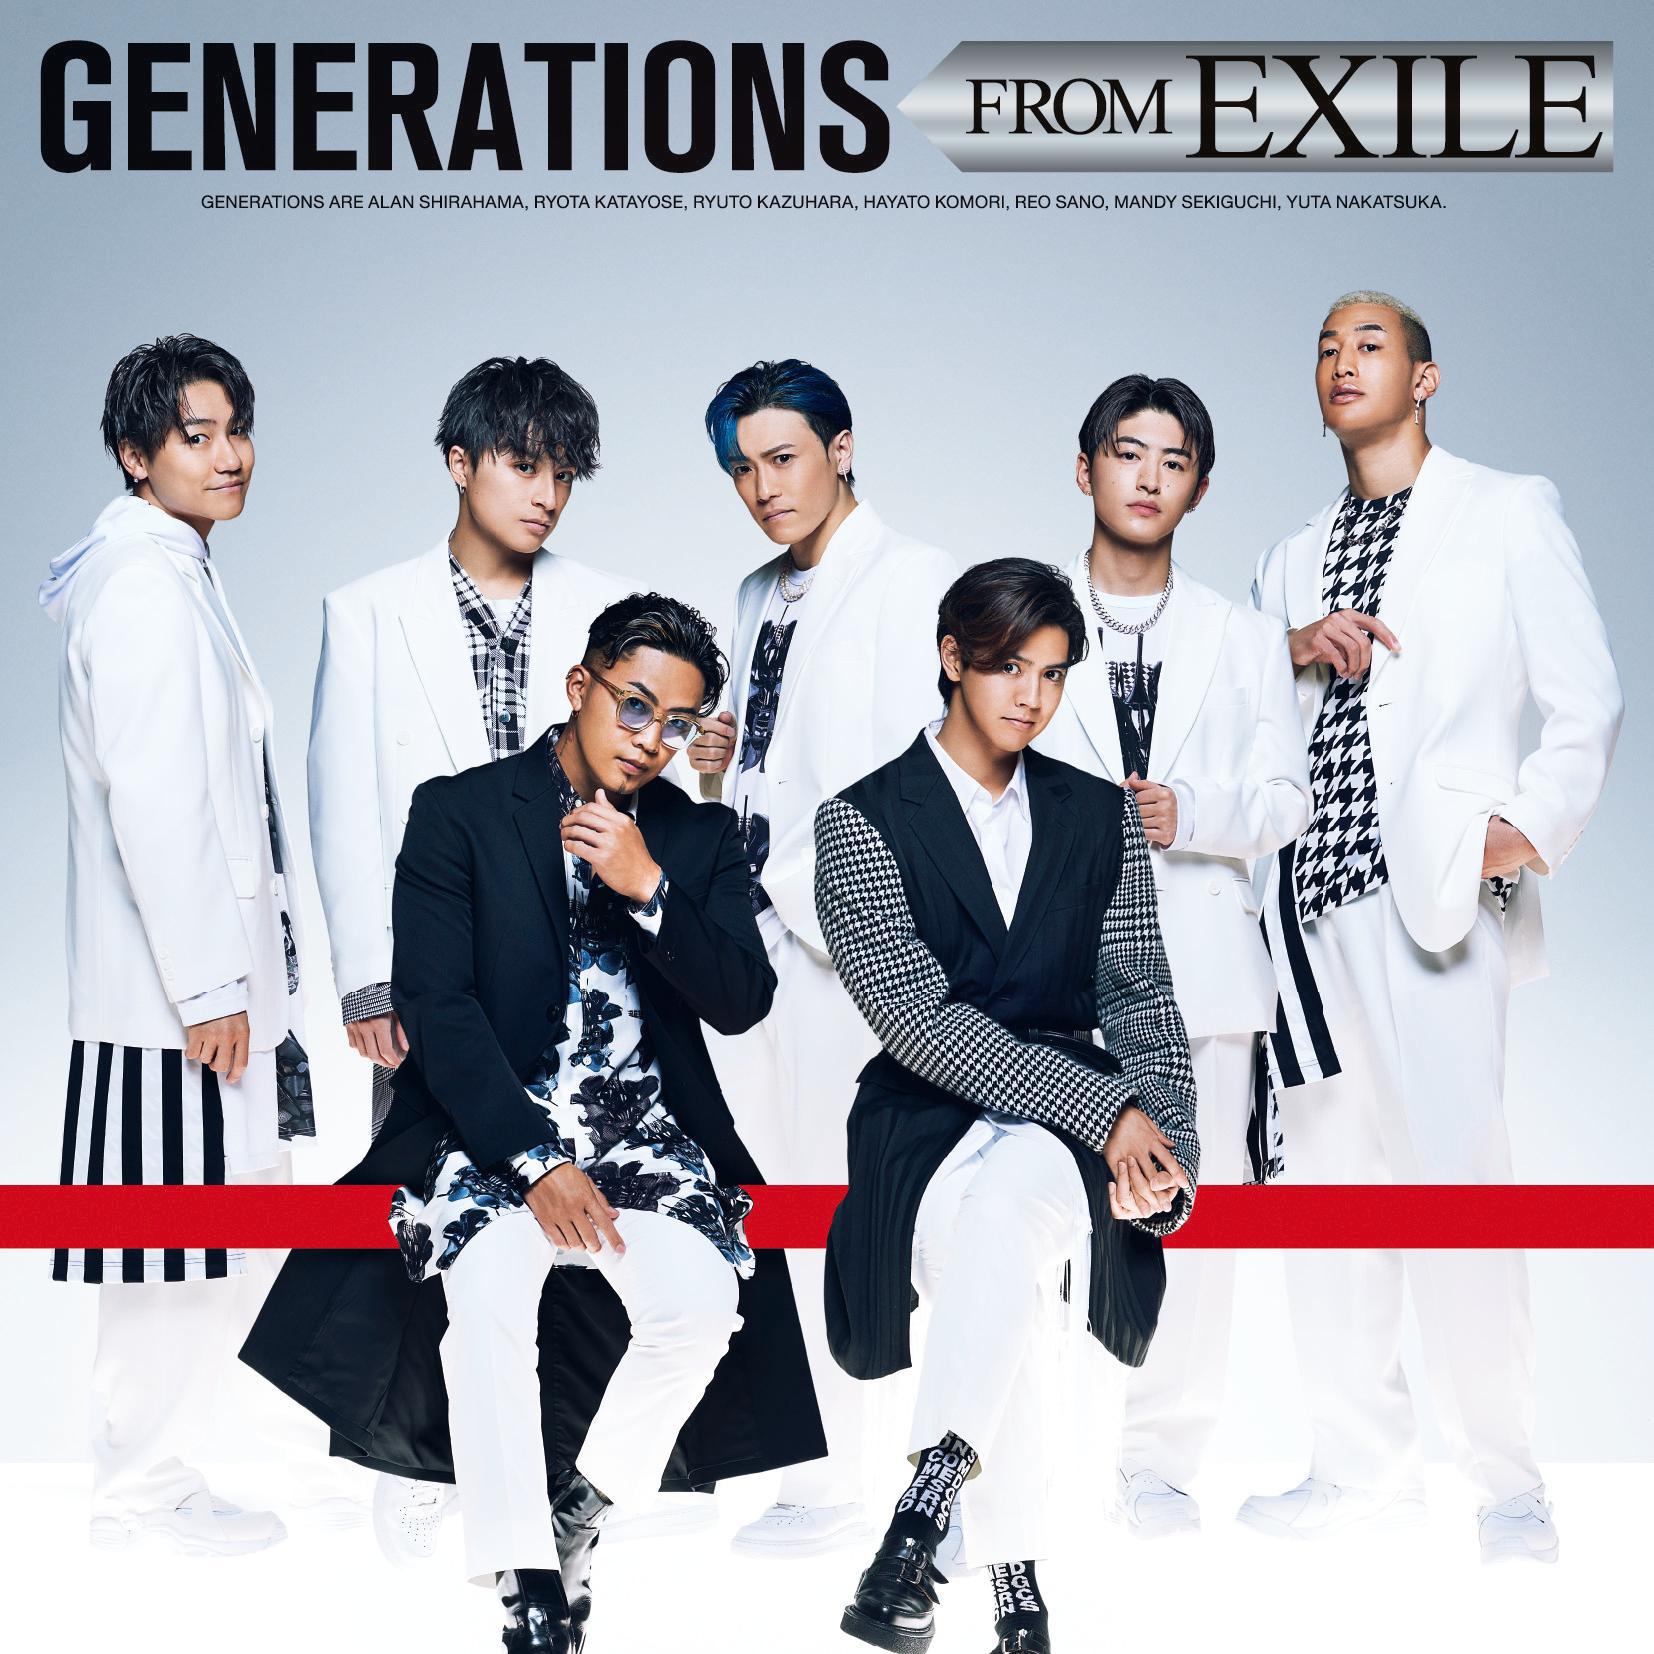 Together Instrumental歌词 歌手GENERATIONS from EXILE TRIBE-专辑GENERATIONS FROM EXILE-单曲《Together Instrumental》LRC歌词下载